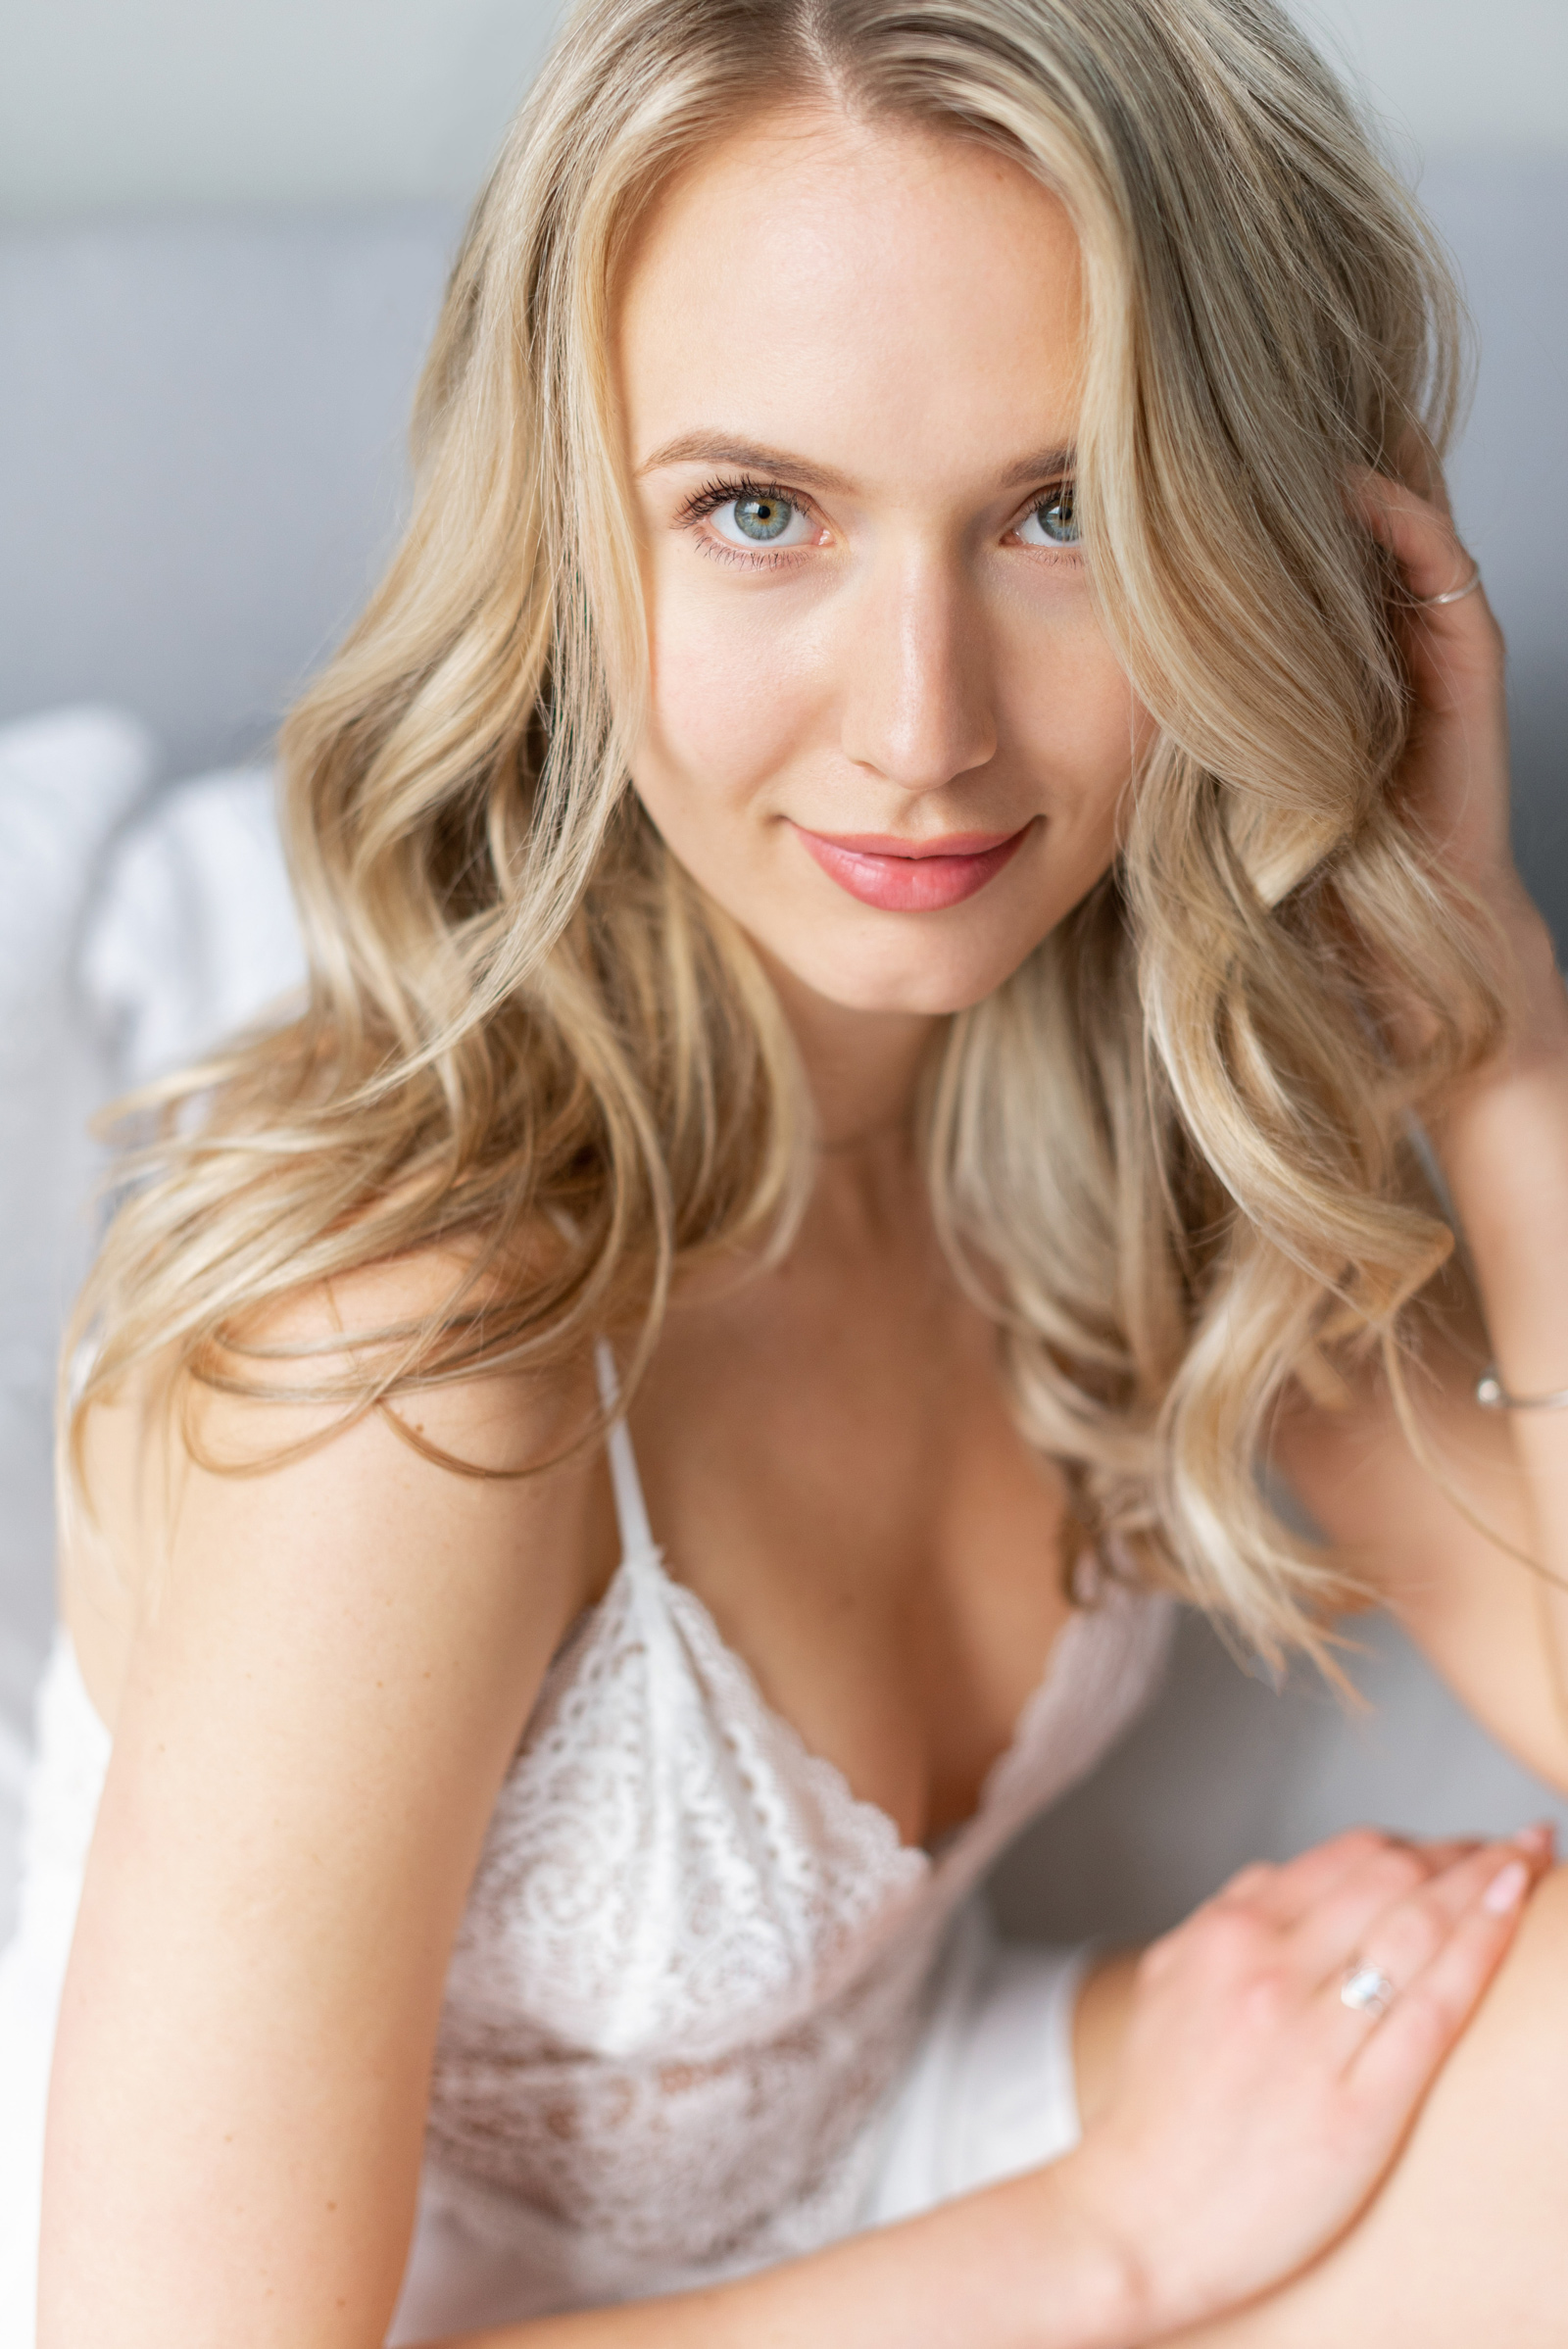 Vancouver womens beauty portraits and photoshoot